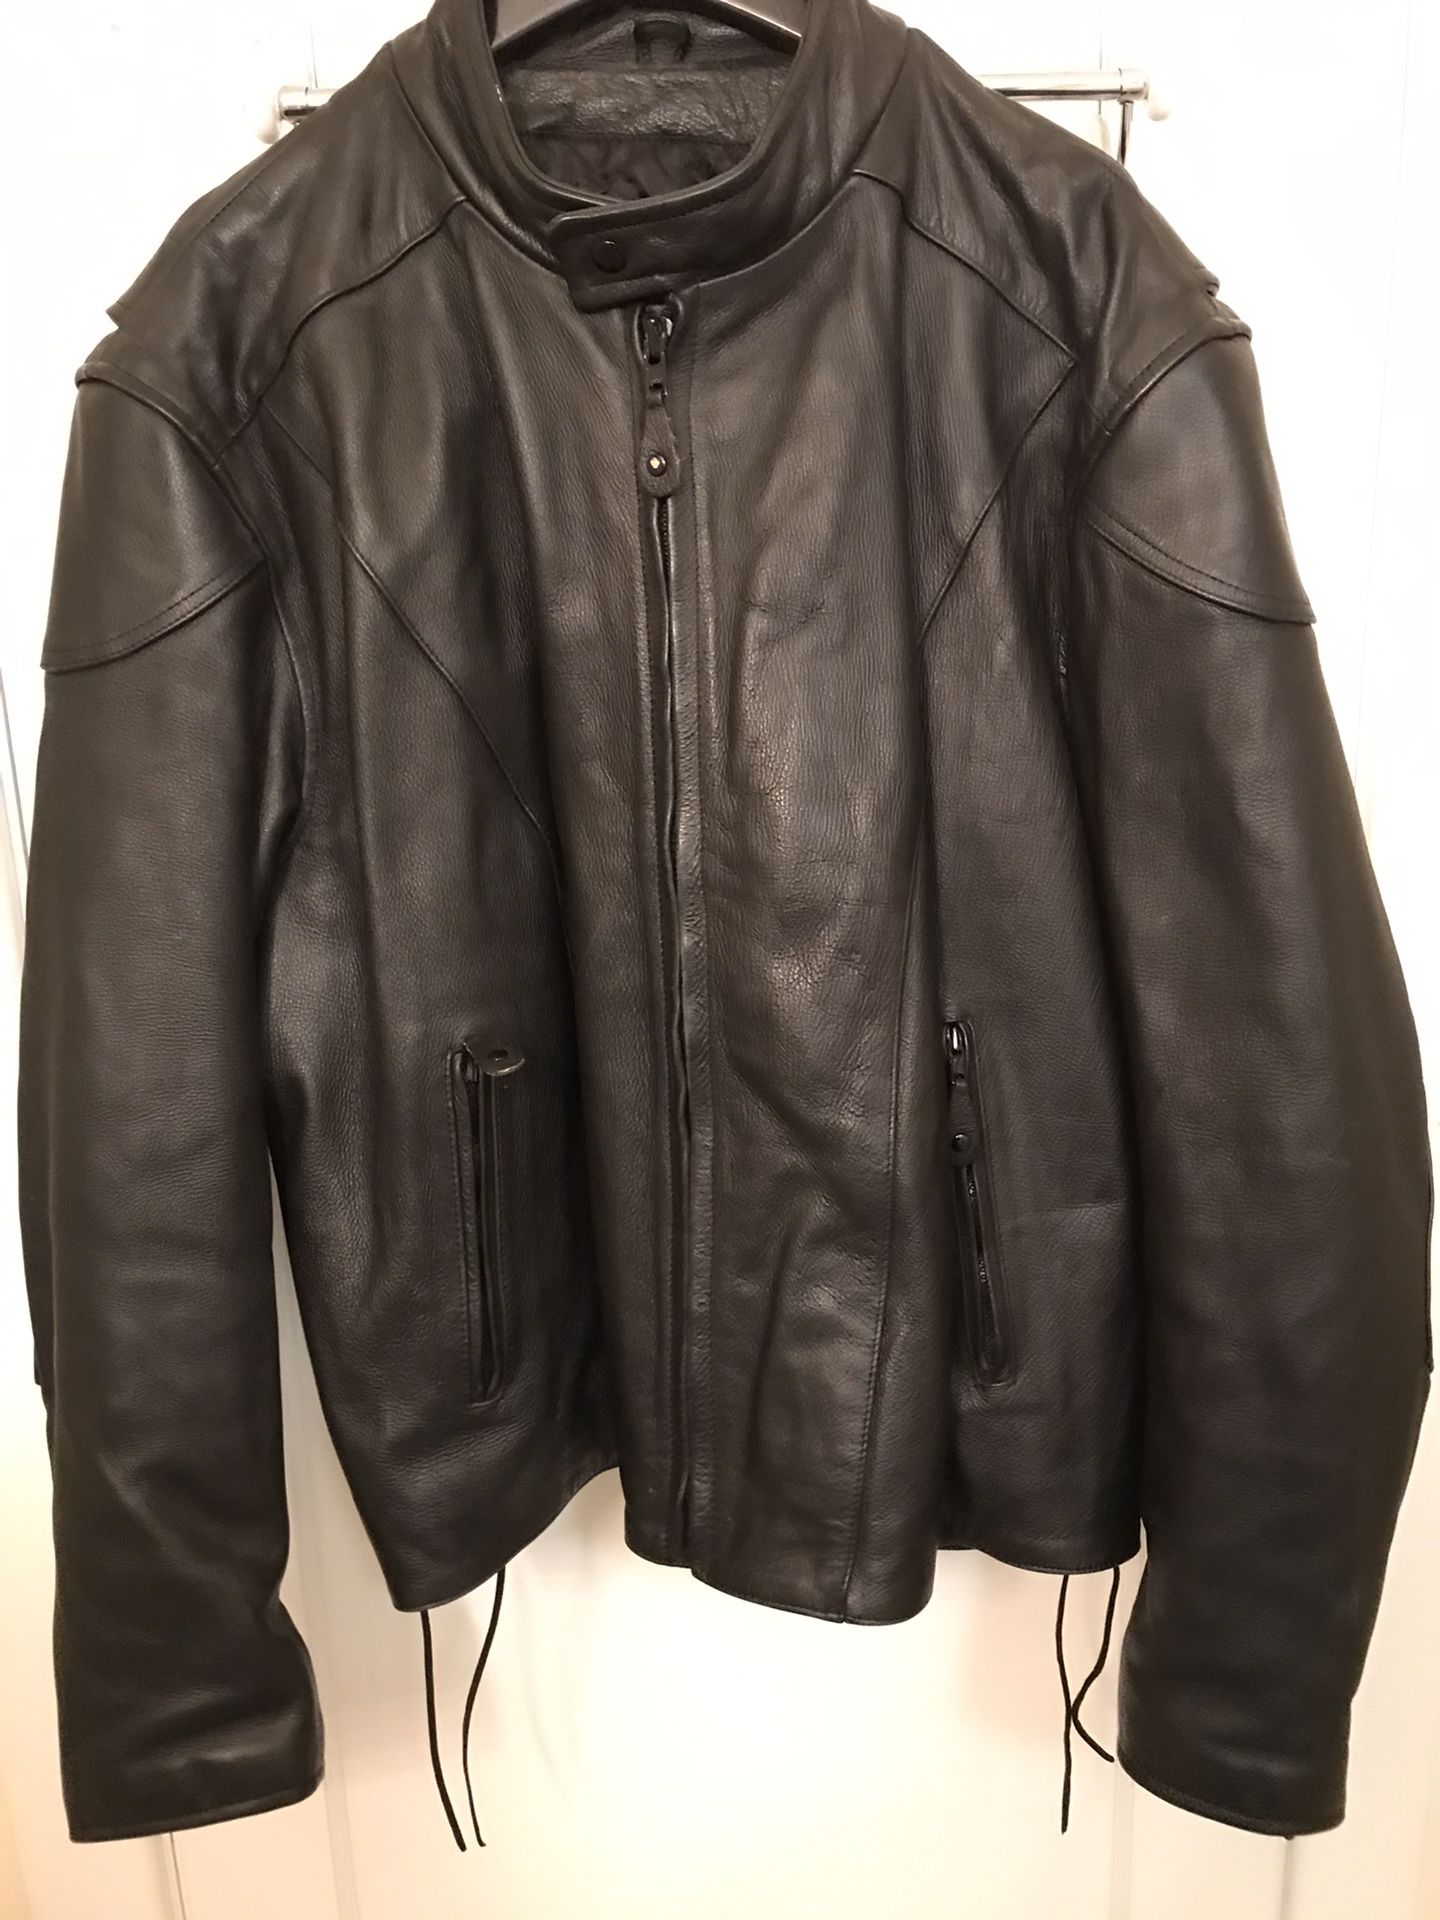 Like New - River Road Heavy Leather Motorcycle Jacket - Size 52